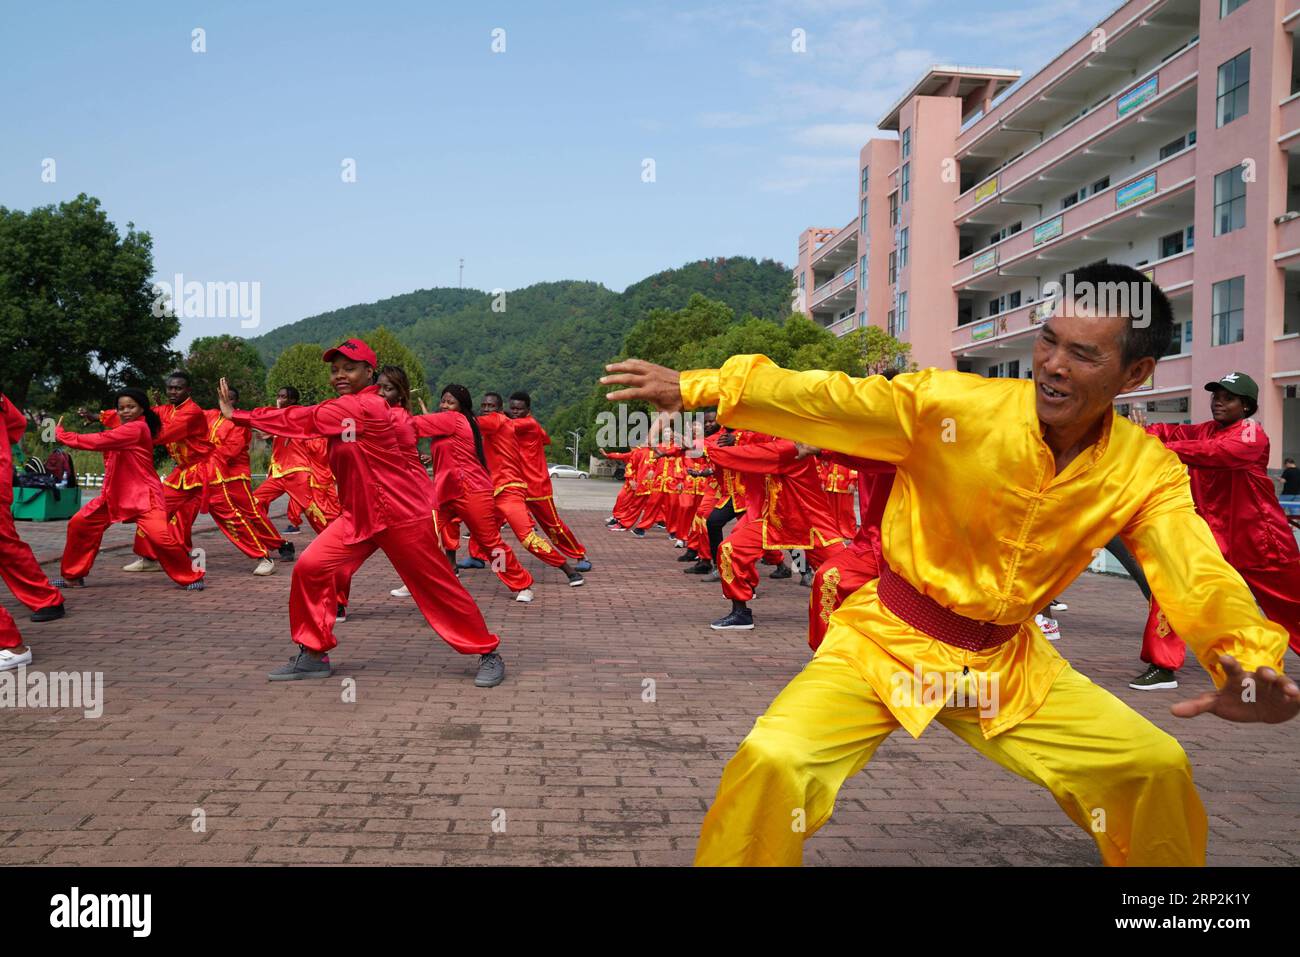 (180905) -- XINYU, Sept. 5, 2018 -- African students learn martial arts in Xinyu, east China s Jiangxi Province, Sept. 5, 2018. The Xinyu university set up courses of embroidery and martial arts for African students to learn about Chinese culture as the new semester begins. ) CHINA-JIANGXI-AFRICAN STUDENT-CHINESE CULTURE (CN) SongxZhenping PUBLICATIONxNOTxINxCHN Stock Photo